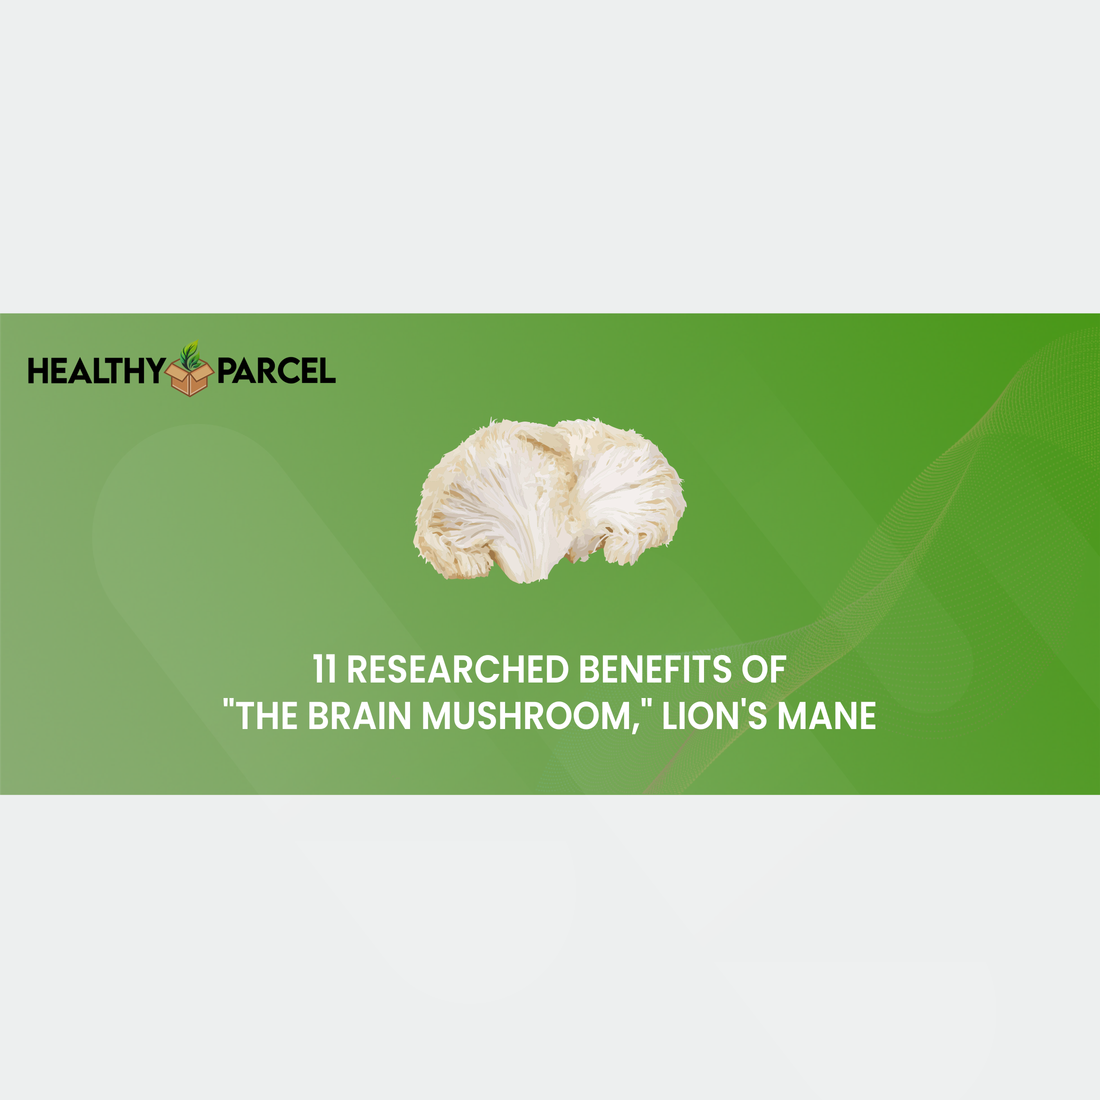 11 Researched Benefits of "The Brain Mushroom," Lion's Mane